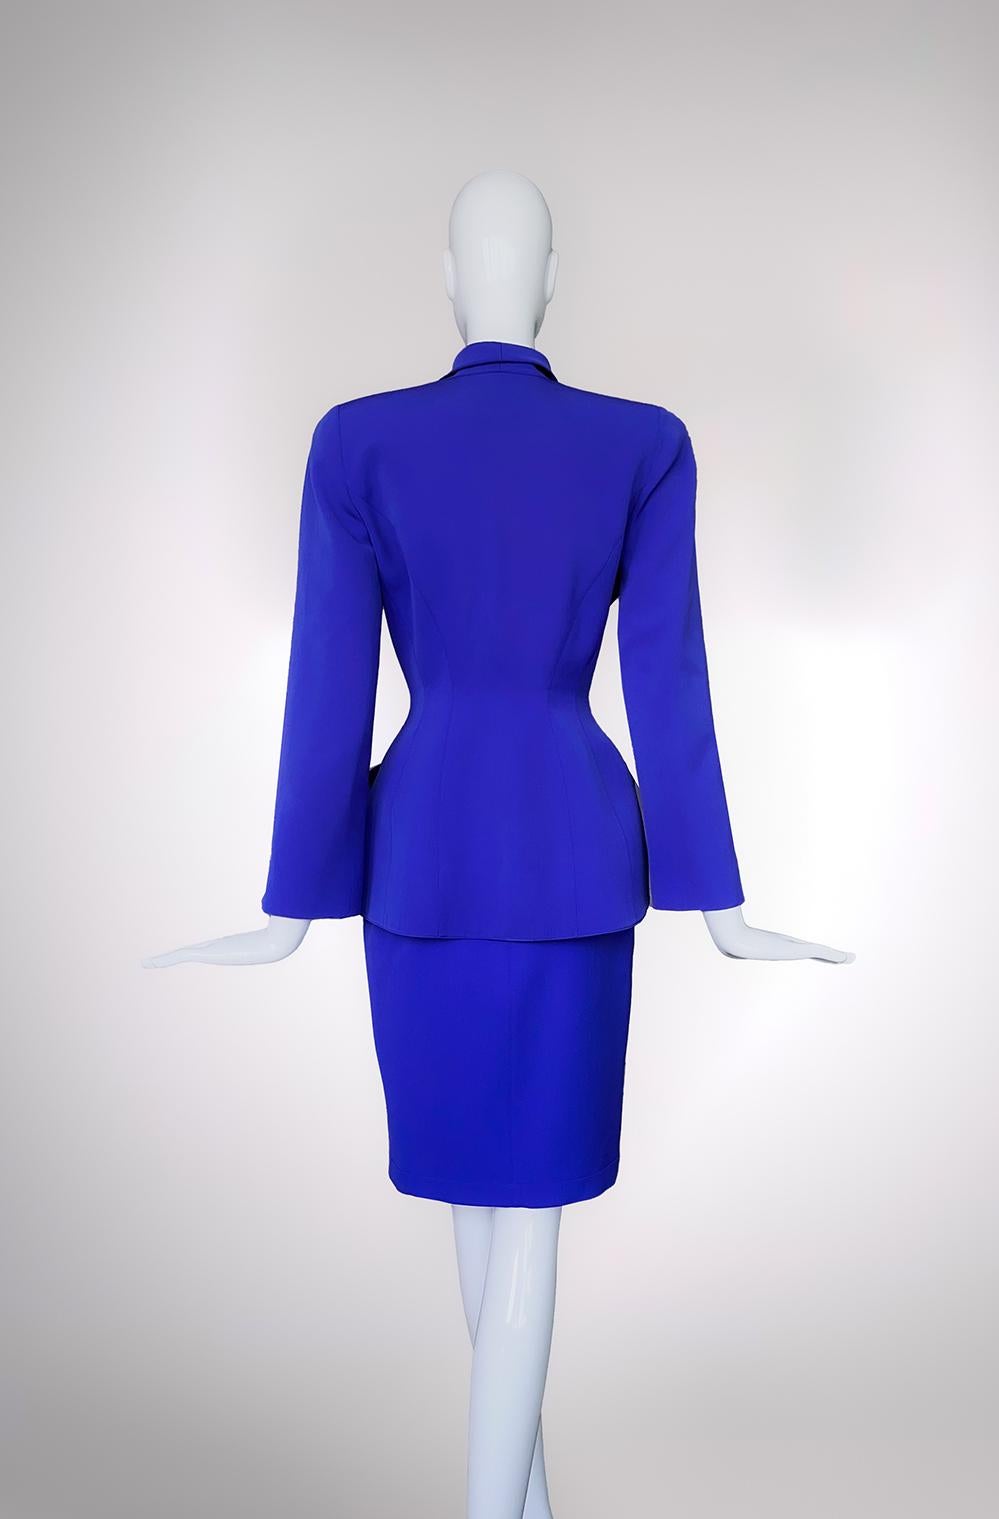 Thierry Mugler Archival FW 1996 Skirt Suit Blue Metal Arrows Jacket Skirt For Sale 5